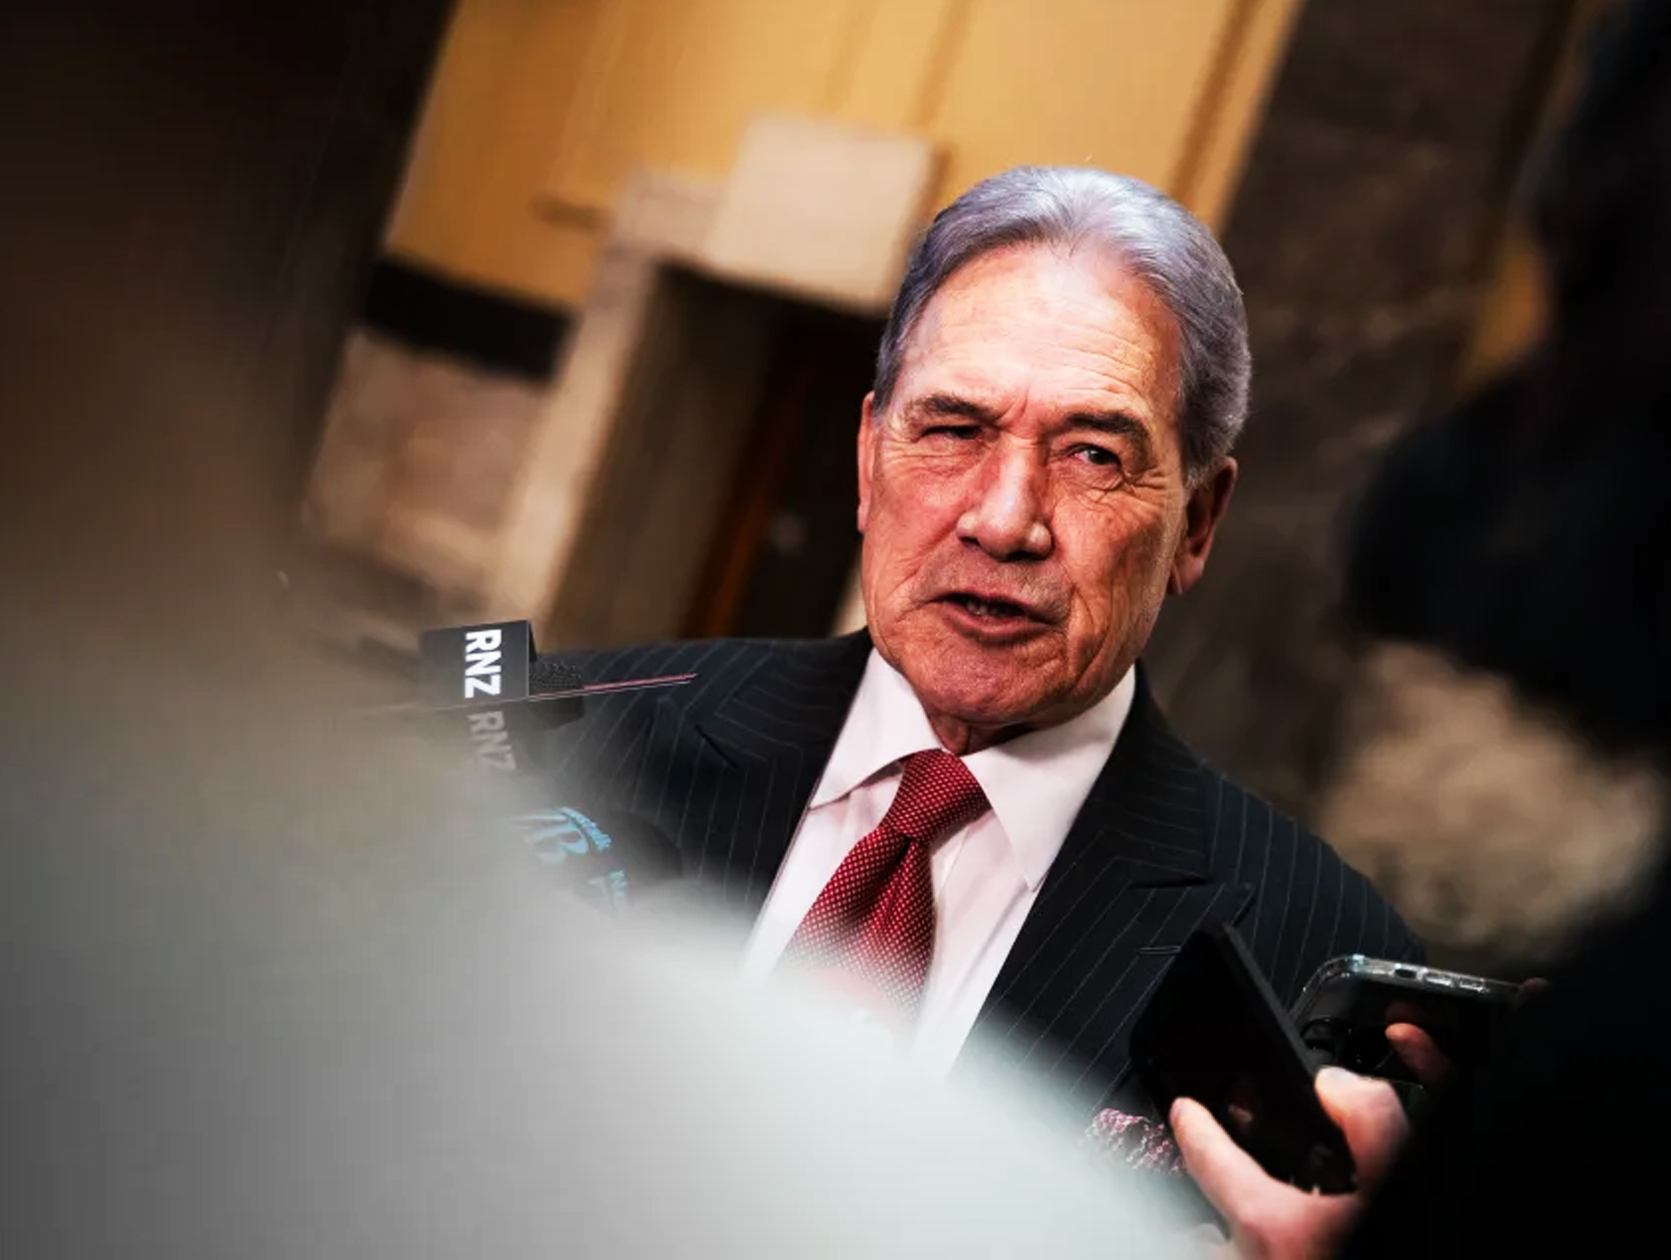 “Winston Peters Faces Accusations of Making ‘Entirely Defamatory’ Comments About Former Australian Minister”